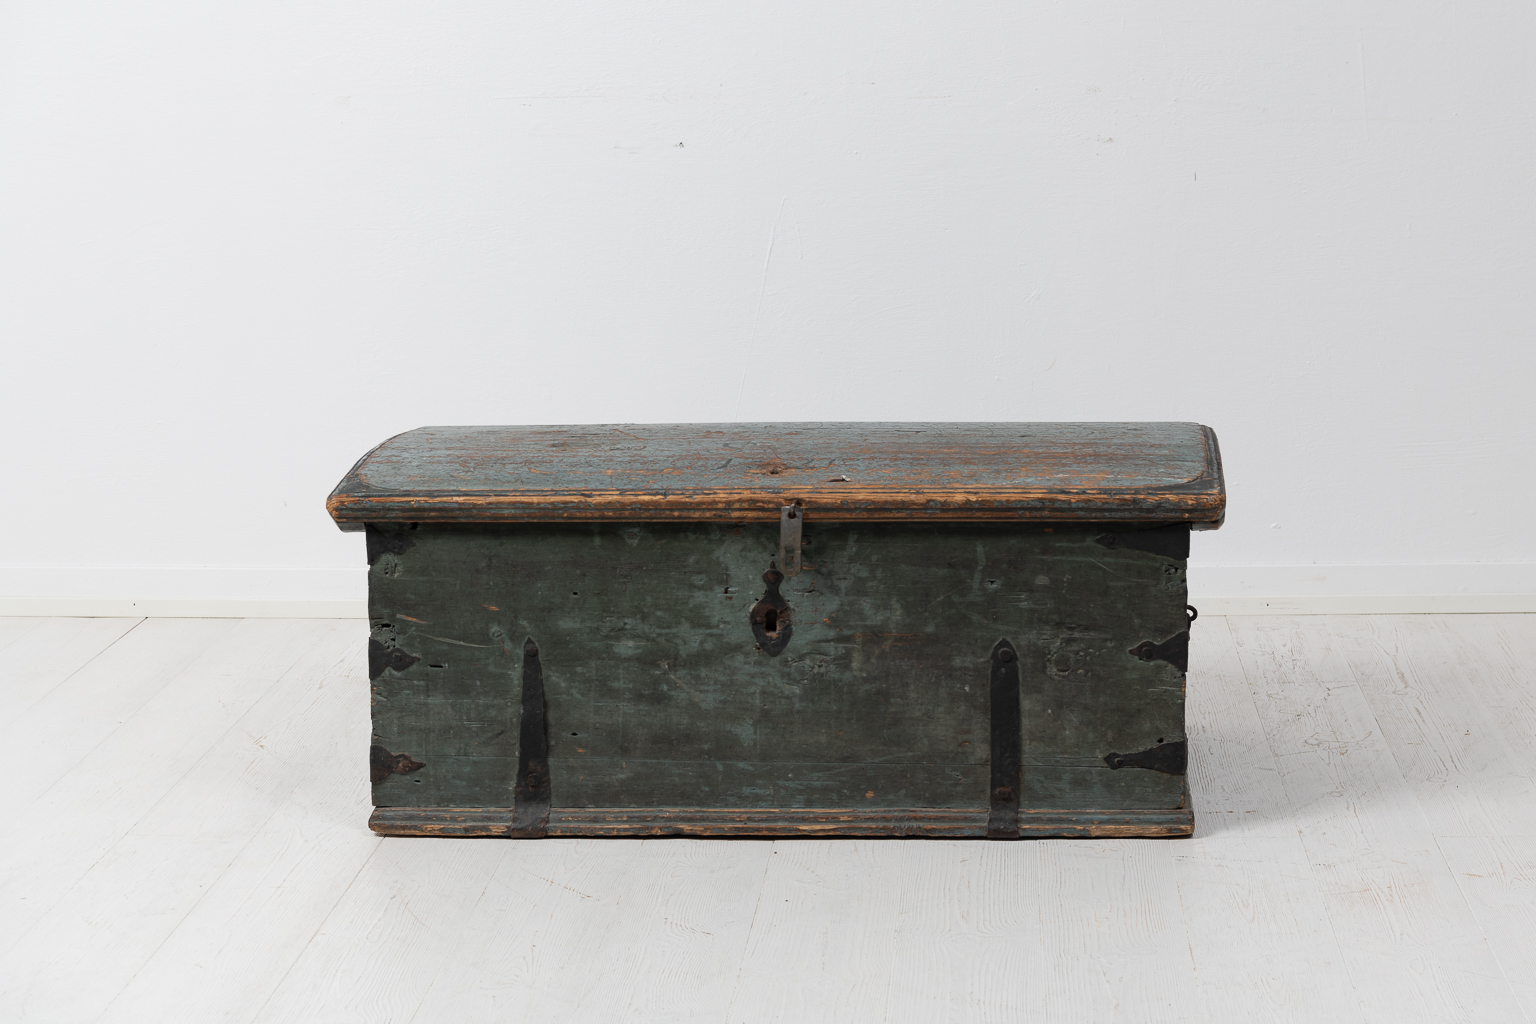 Antique northern Swedish chest in original condition. The chest is an attractive mid size where it's large enough to be practical as well as stylish